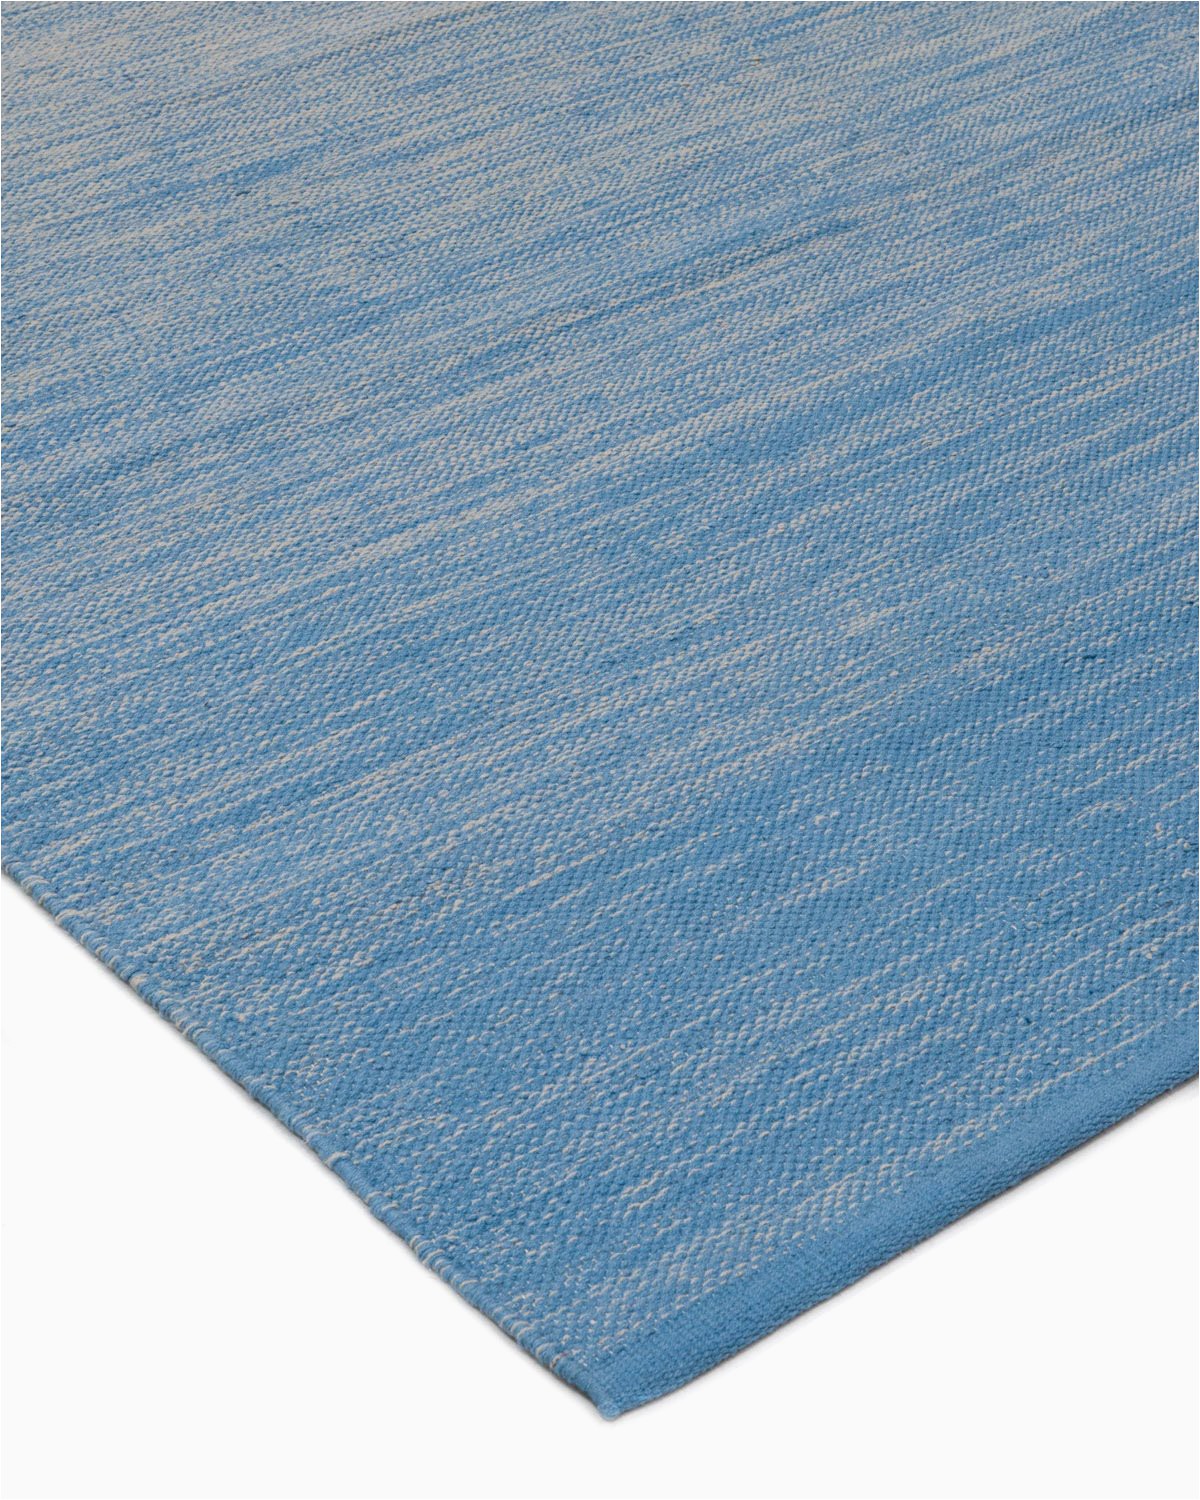 Blue Ombre Rug 8×10 Ombre Blue Multi Sizes